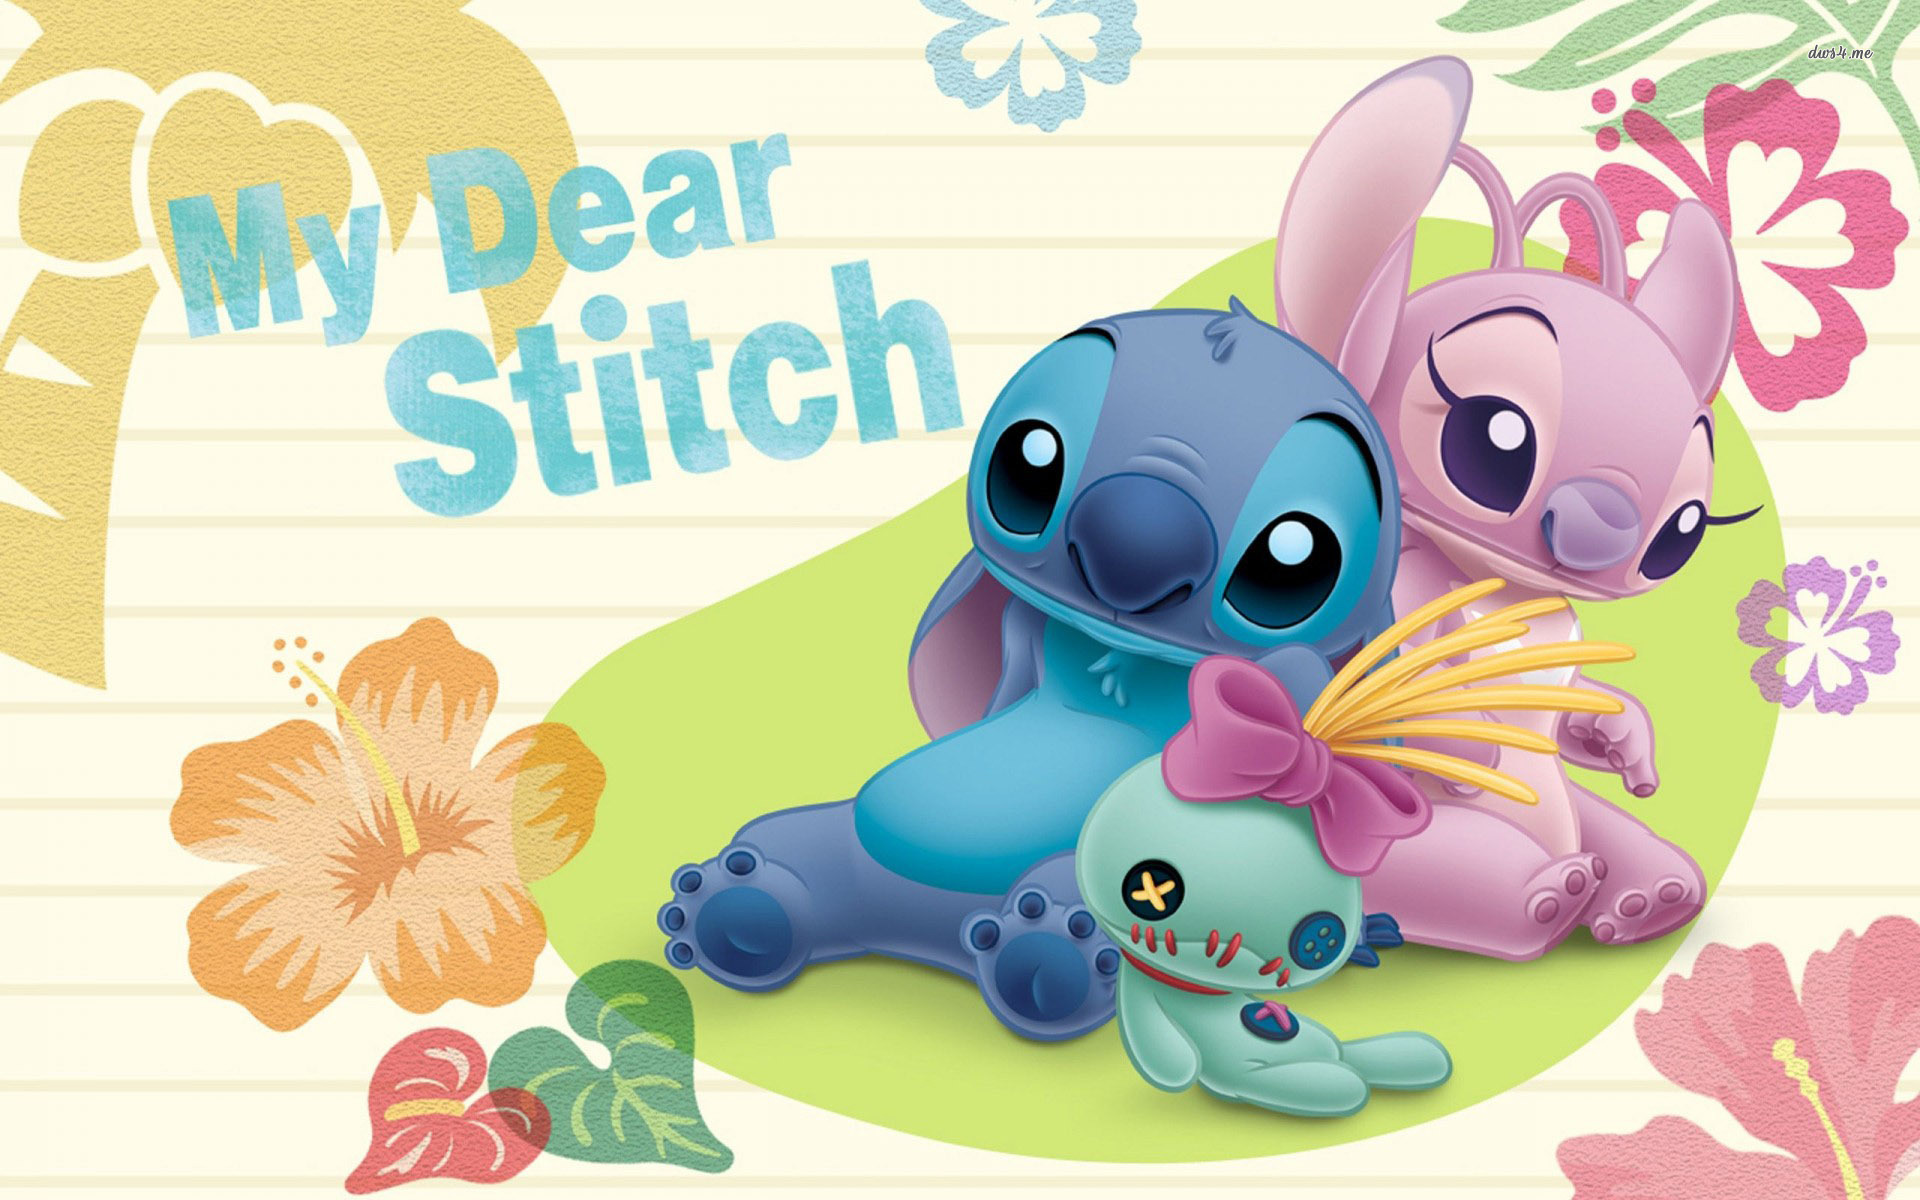 3 Lilo & Stitch HD Wallpapers Backgrounds - Wallpaper Abyss